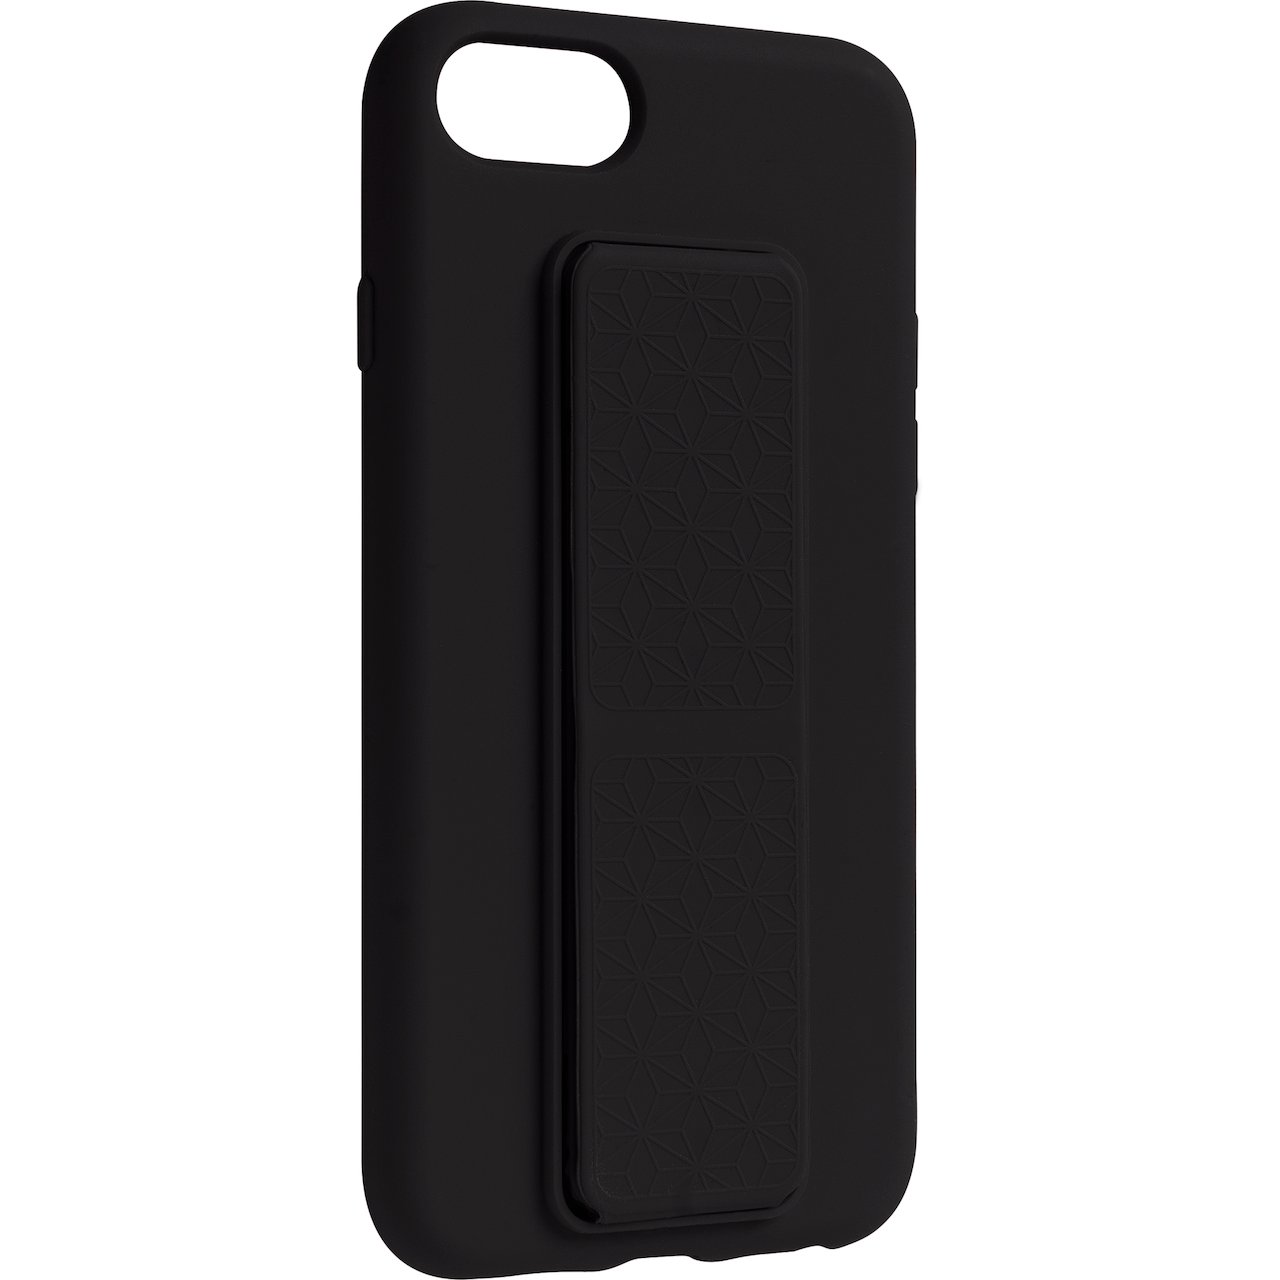 LEKI BYCPH COVER IPHONE 6/7/8/SE 2G/SE 3G GRIP AND STAND SILIKON SORT